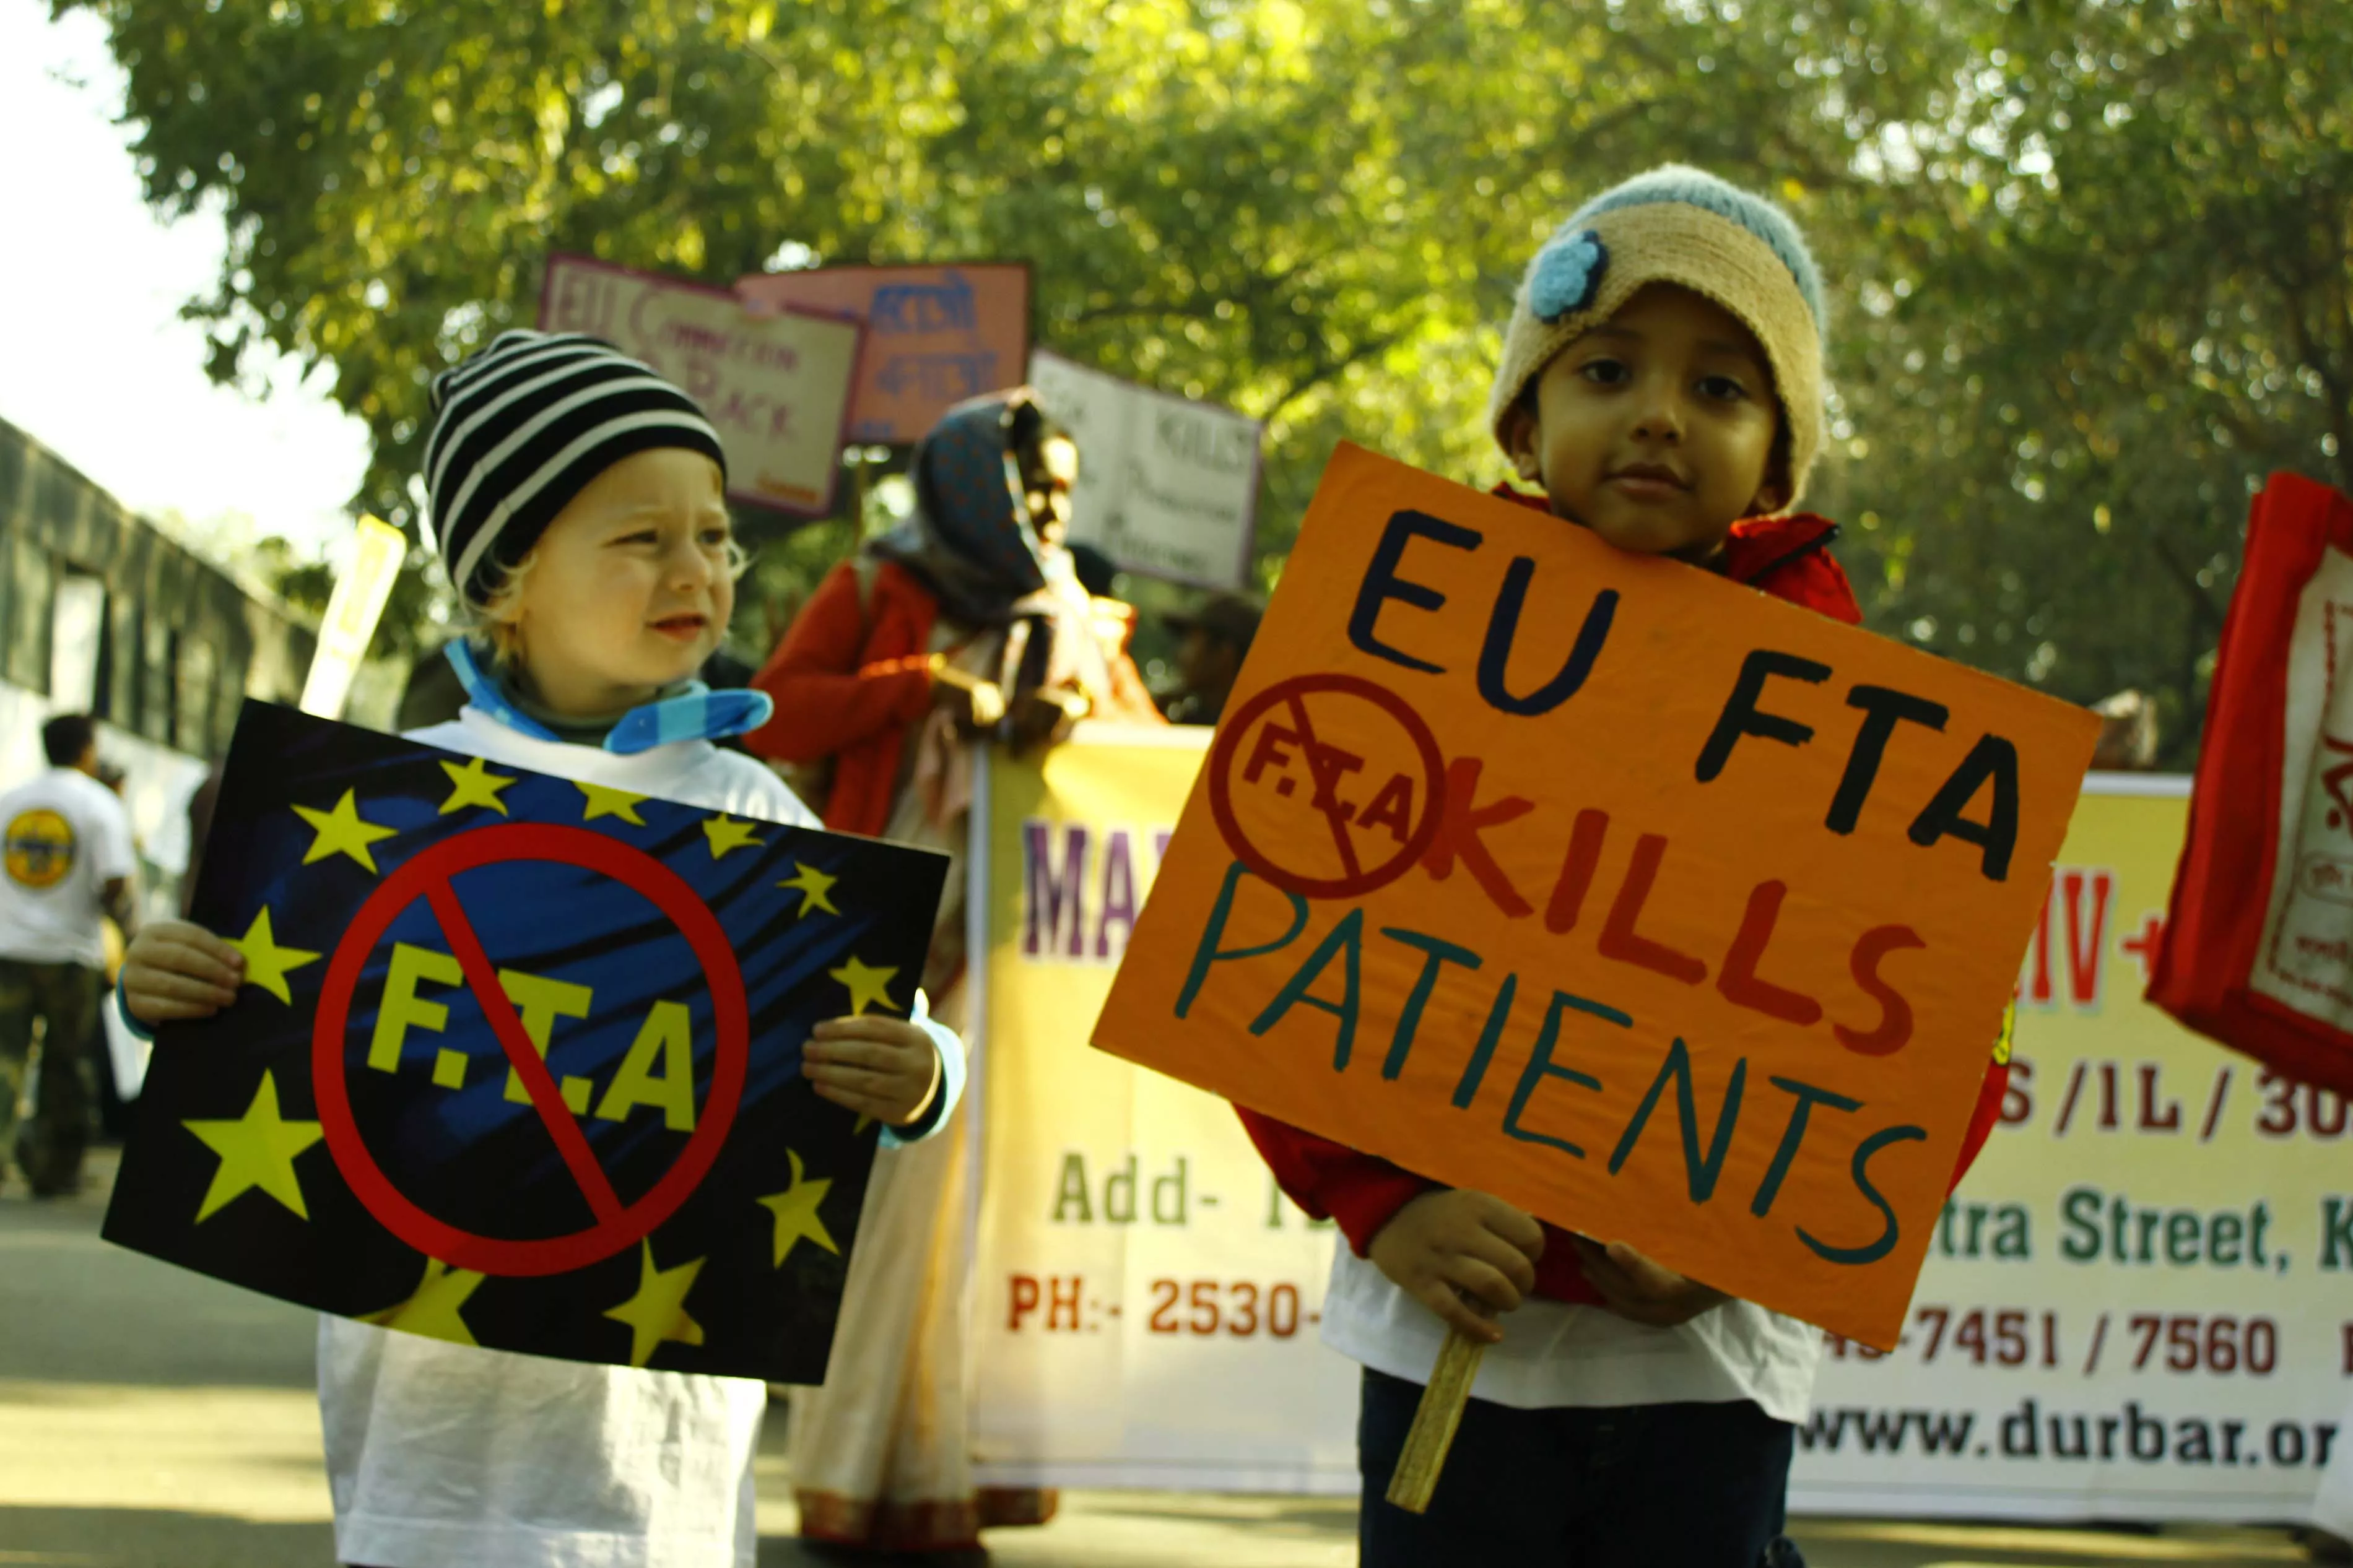 Nearly 2,000 People Living With HIV along with MSF & other civil society organisations rallied in the streets of New Delhi at the start of the EU-India summit. They warned that harmful provisions in a trade deal being negotiated between the EU and India could severely hinder access to affordable medicine for people in developing countries.